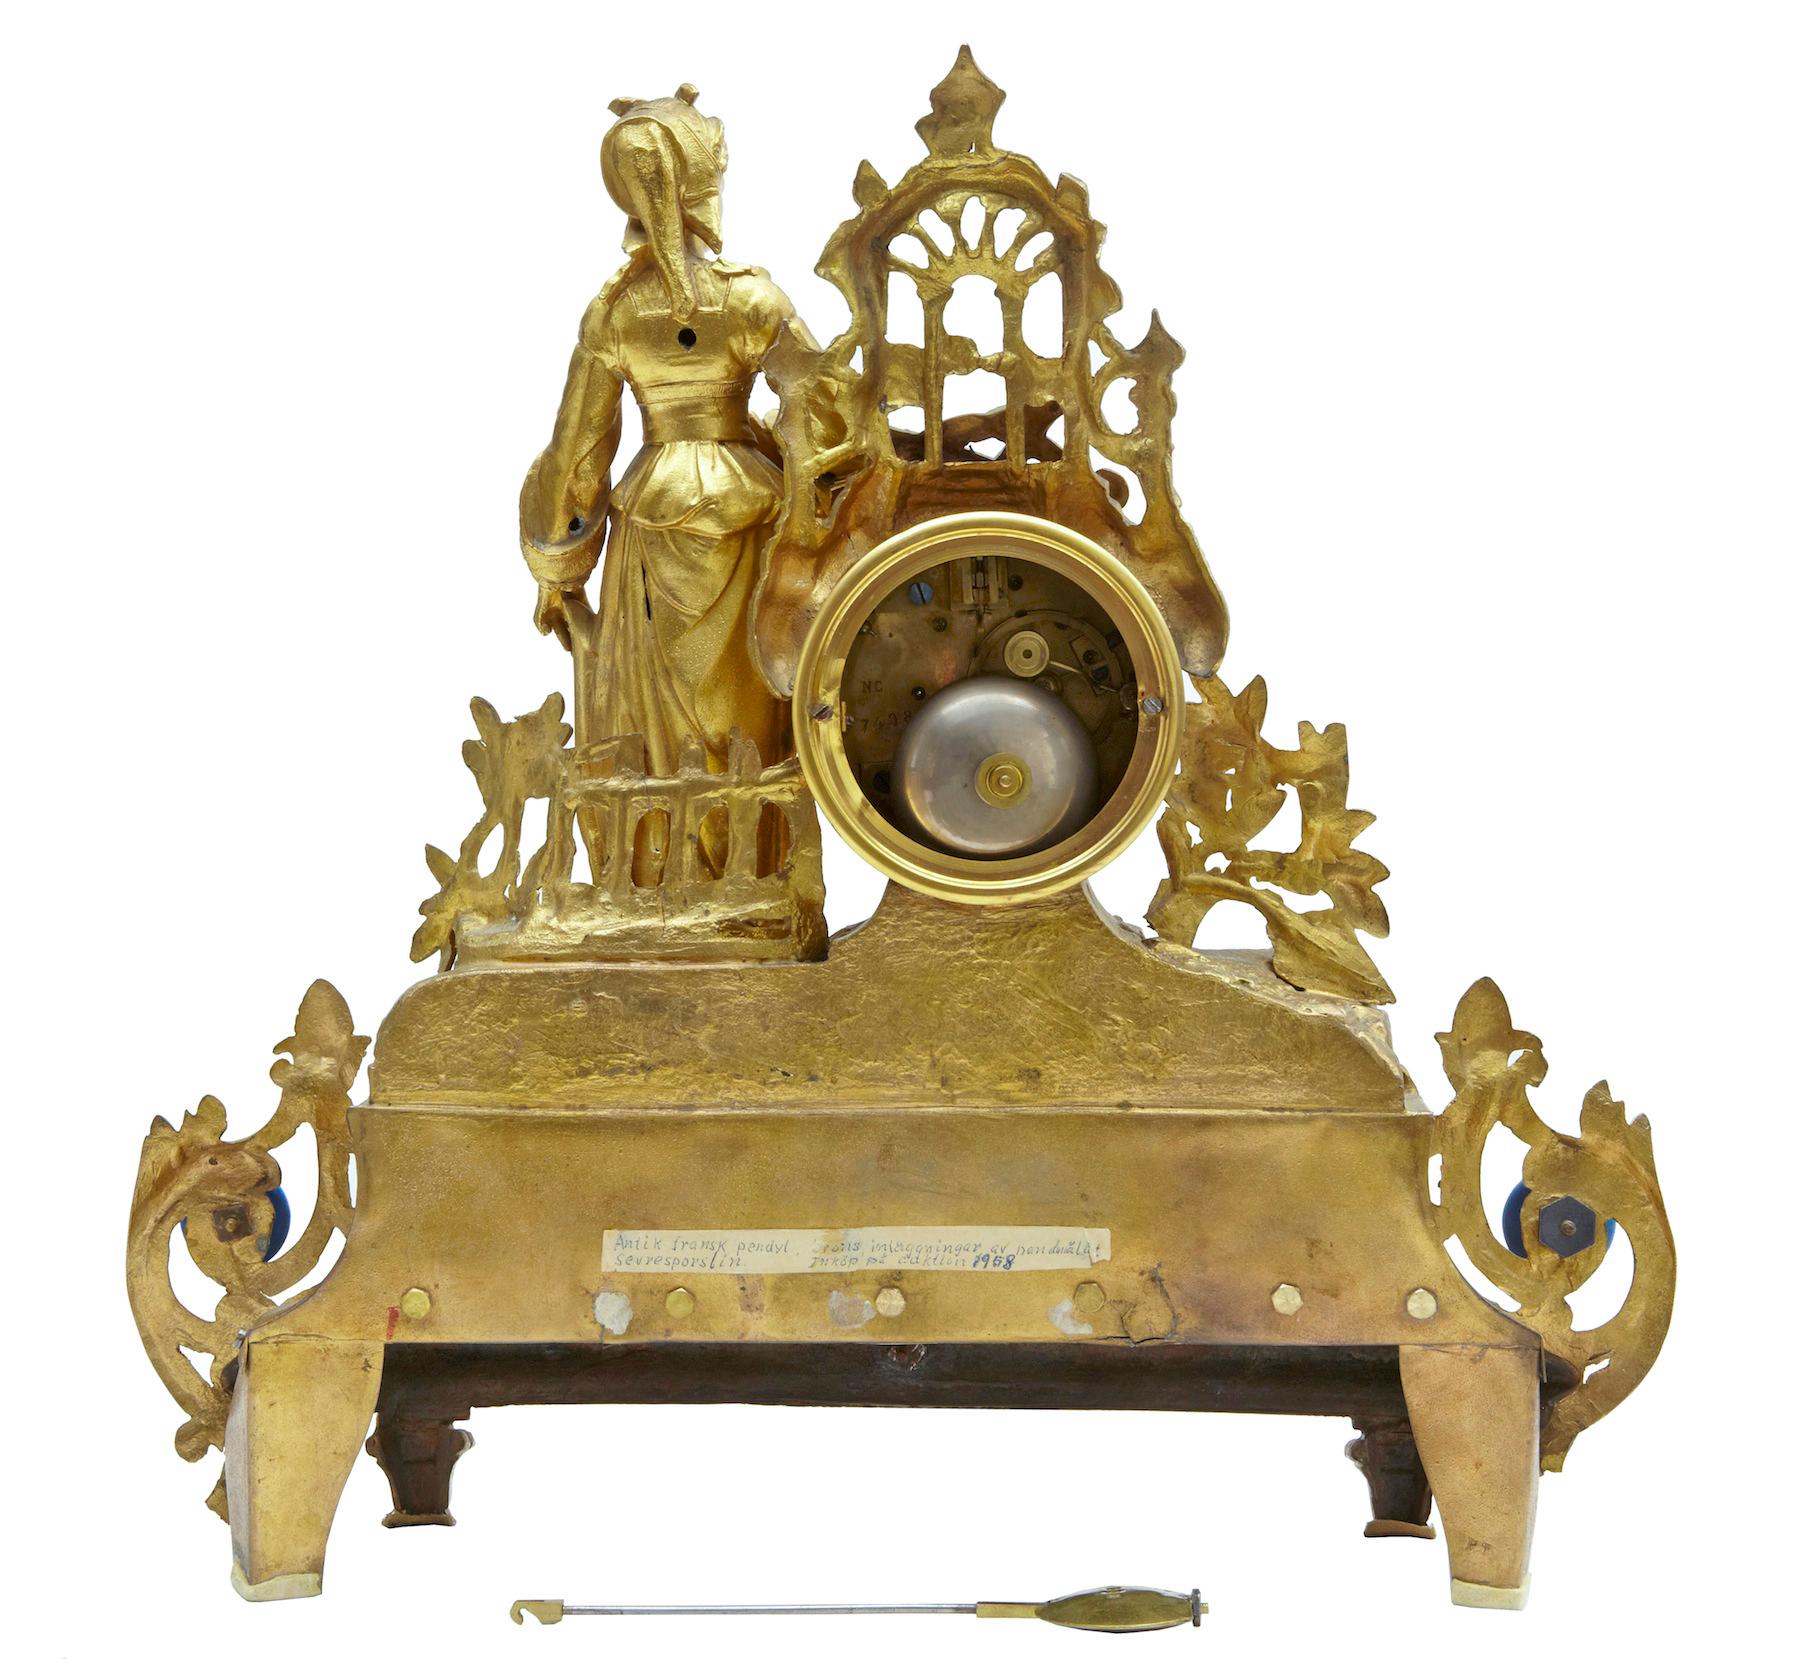 19th century French gilt mantel (fireplace) clock with sèvres plaques, circa 1890.

Fine quality ornate French clock surmounted with a lady in traditional French dress leaning on an architectural window and ship building tools. Enamel clock face